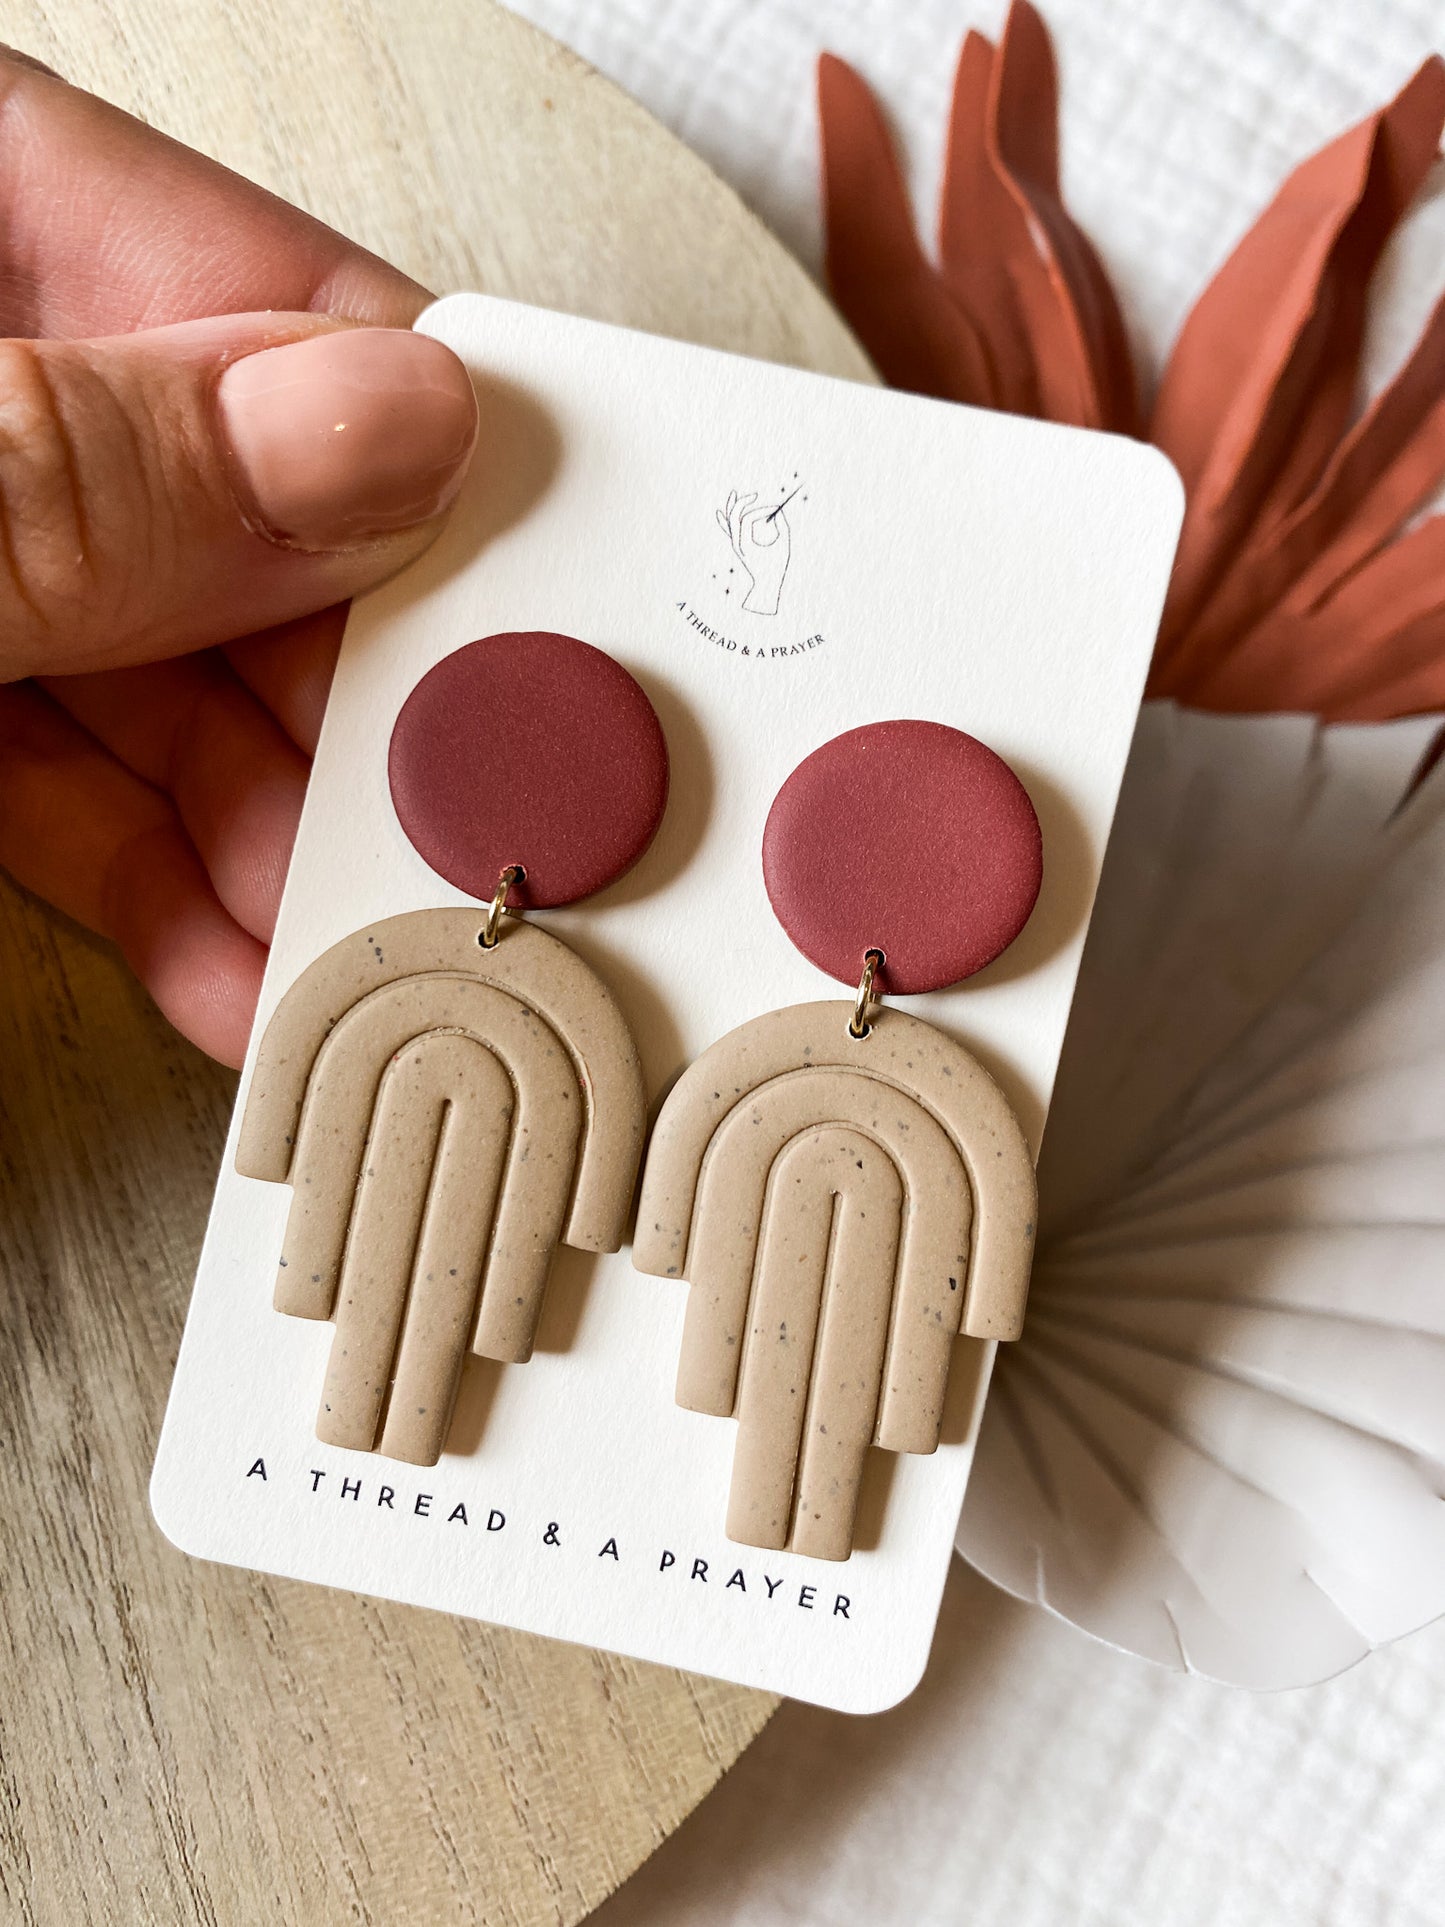 Southwest Style Autumn Colored Clay Earrings | Everyday Earrings | Lightweight